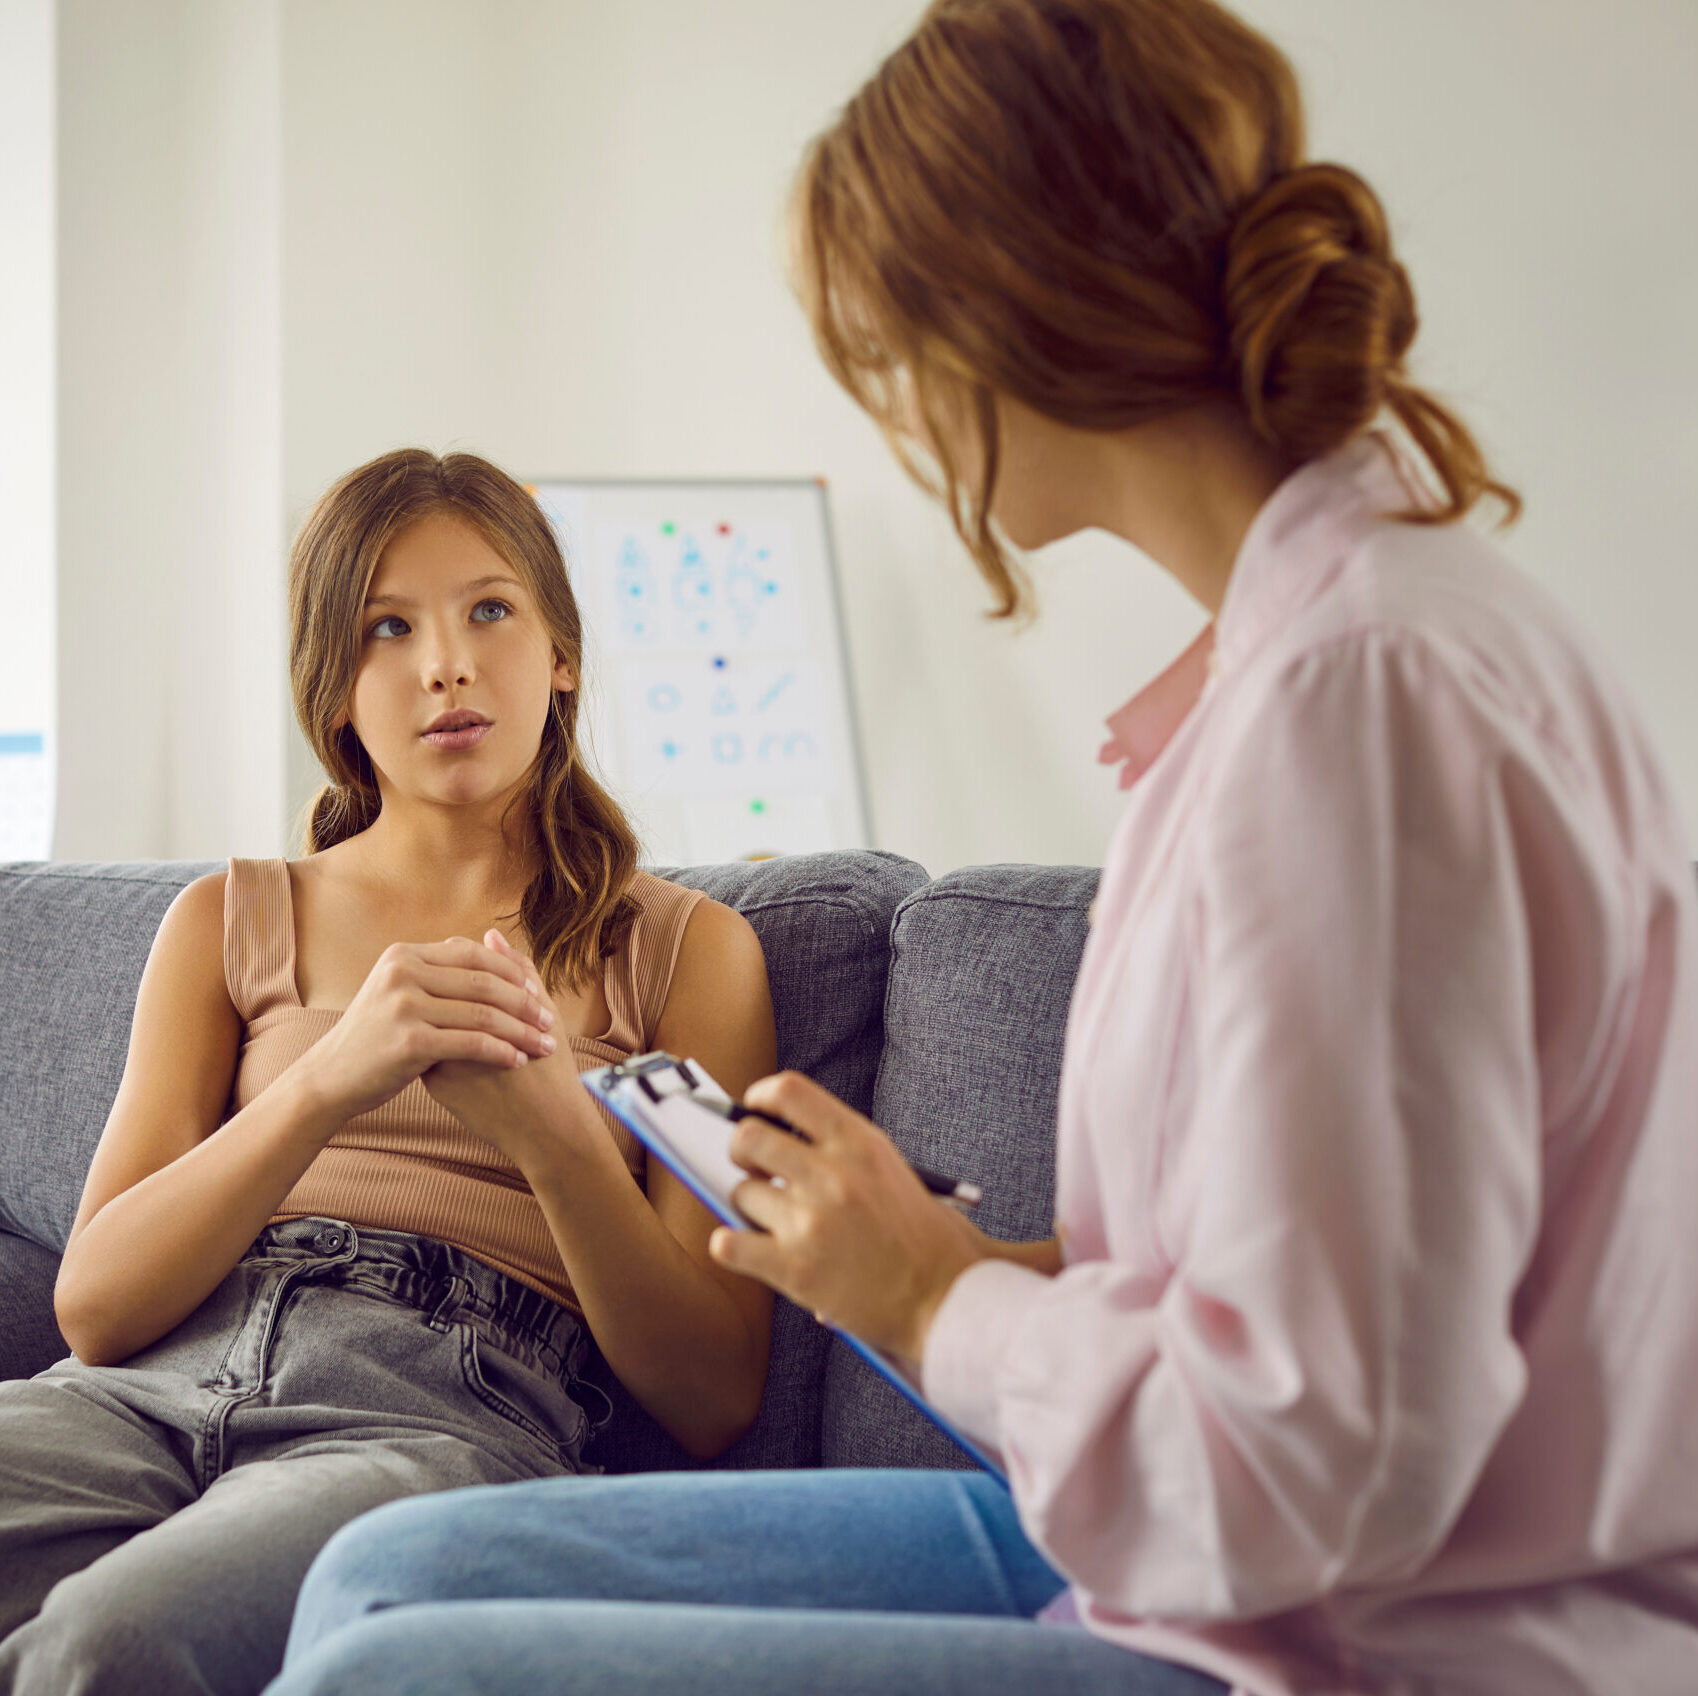 Professional therapist working with an adolescent girl.